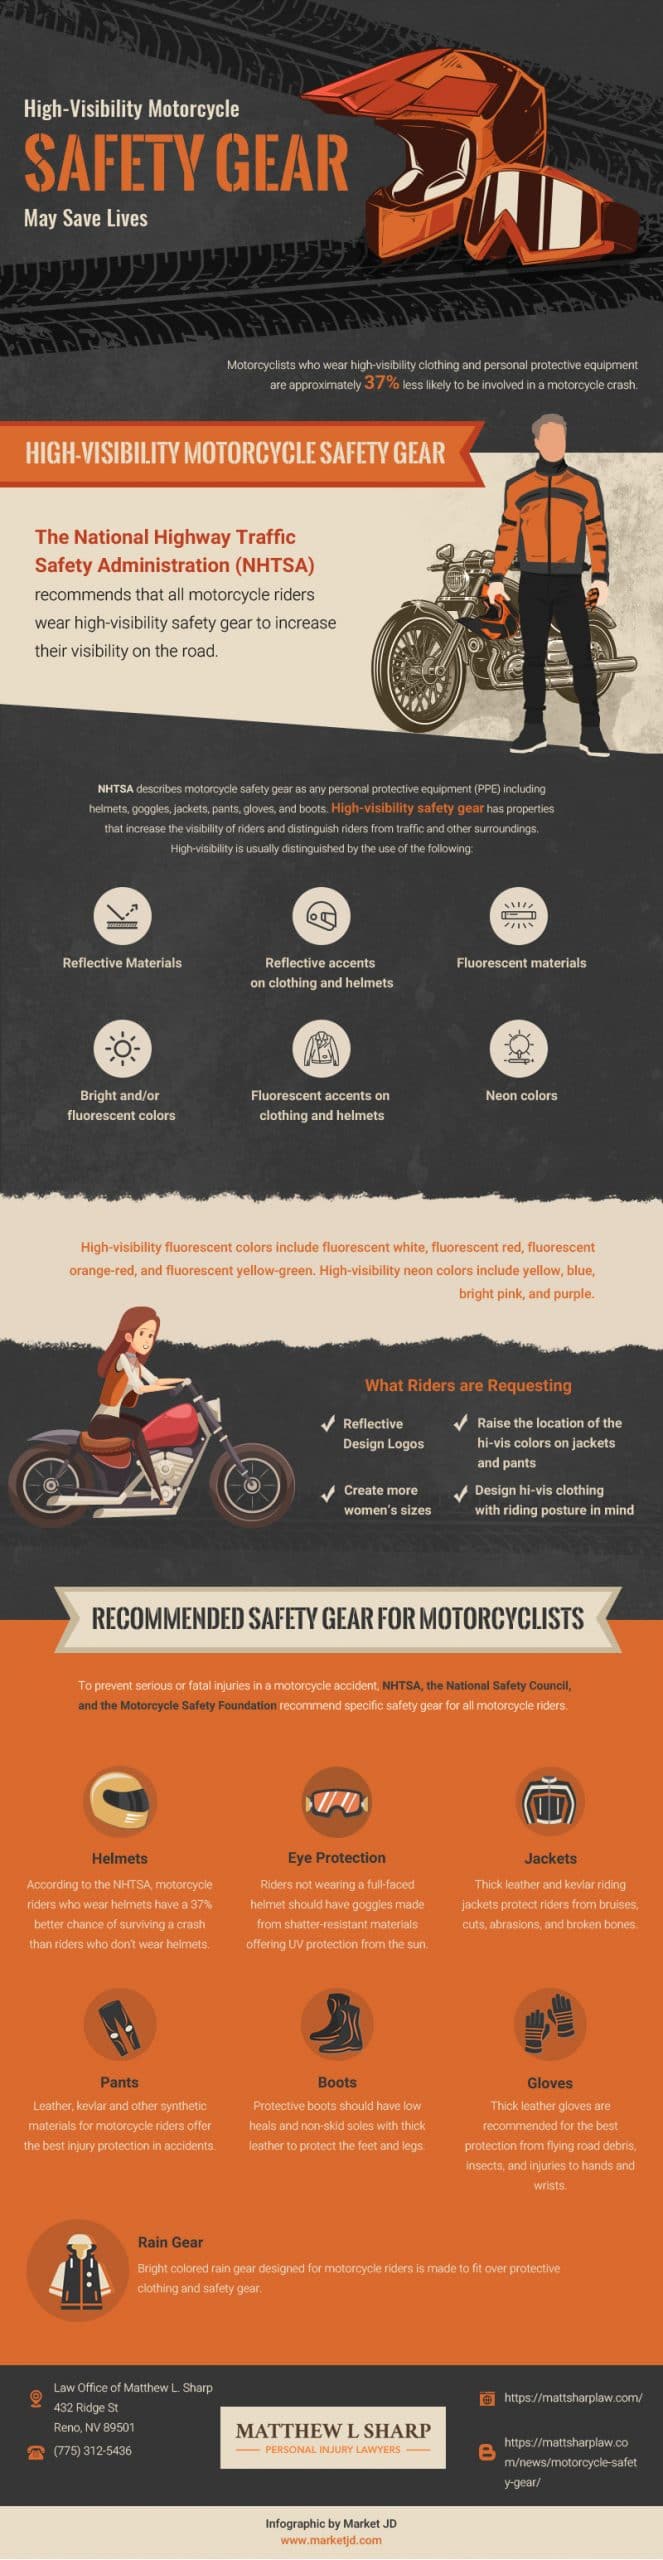 High Visibility Motorcyle Safety Gear May Save Lives infographic